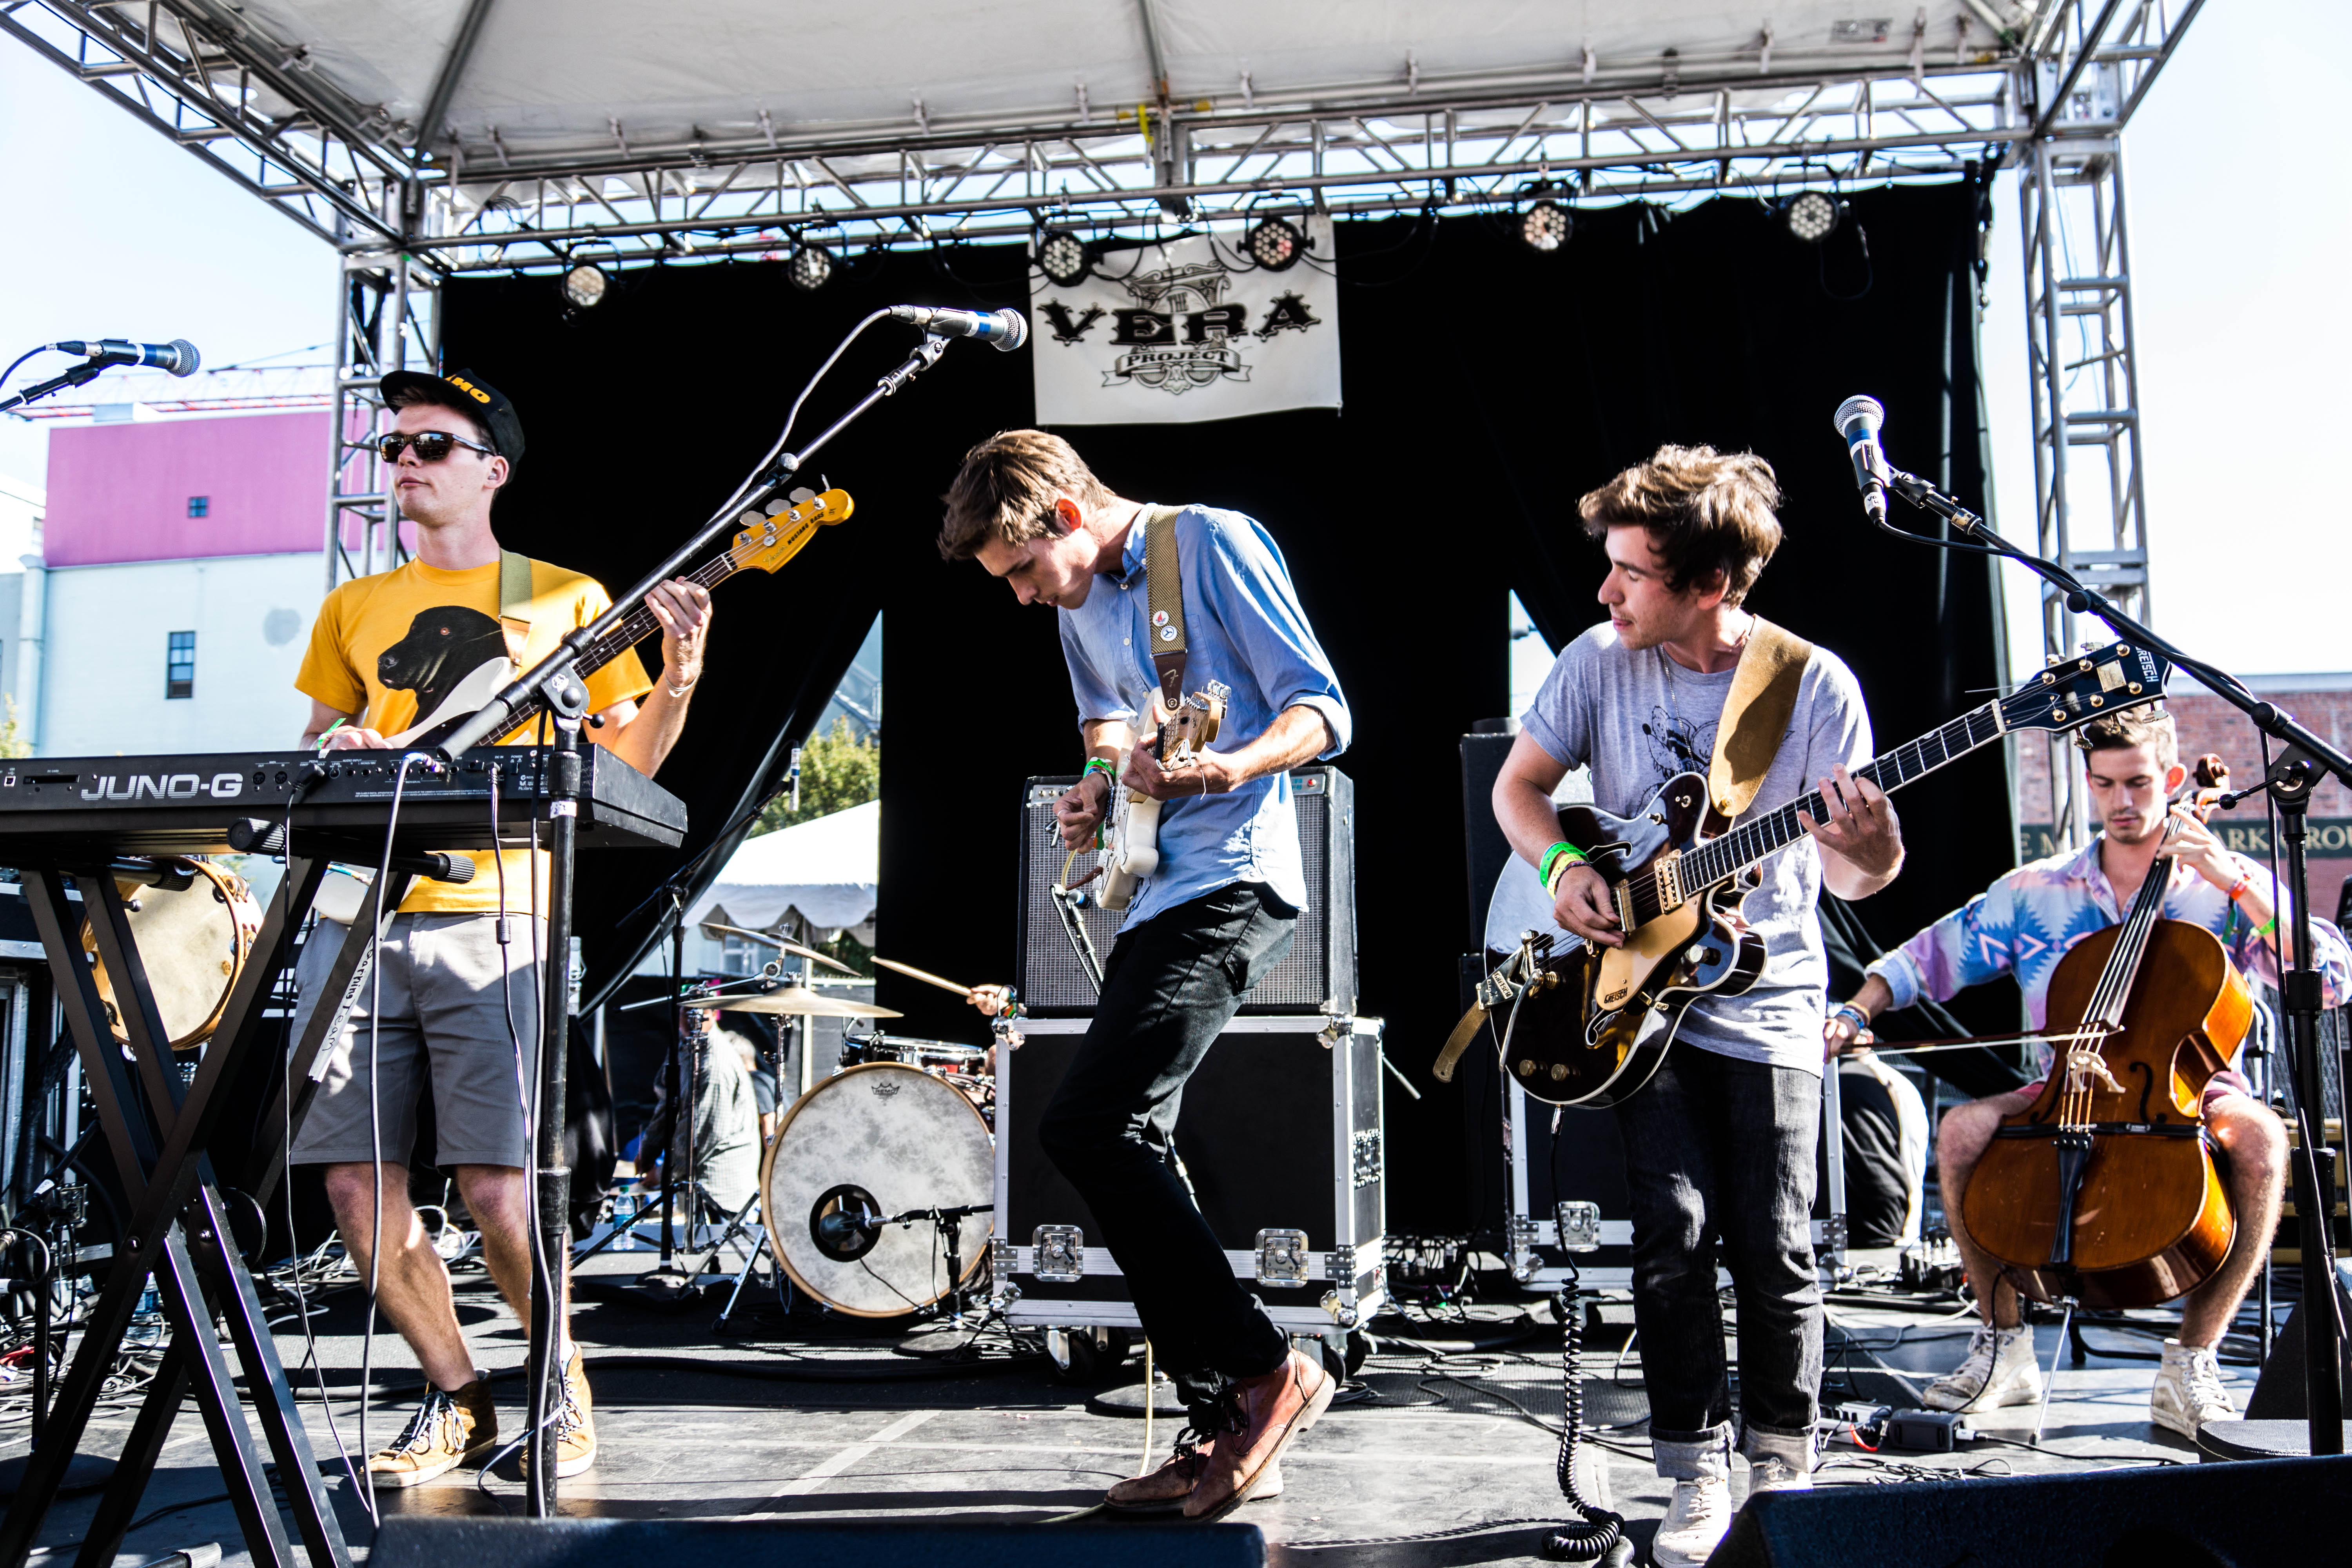 Capitol Hill Block Party 2013: Day 3 (Photo by Greg Roth)